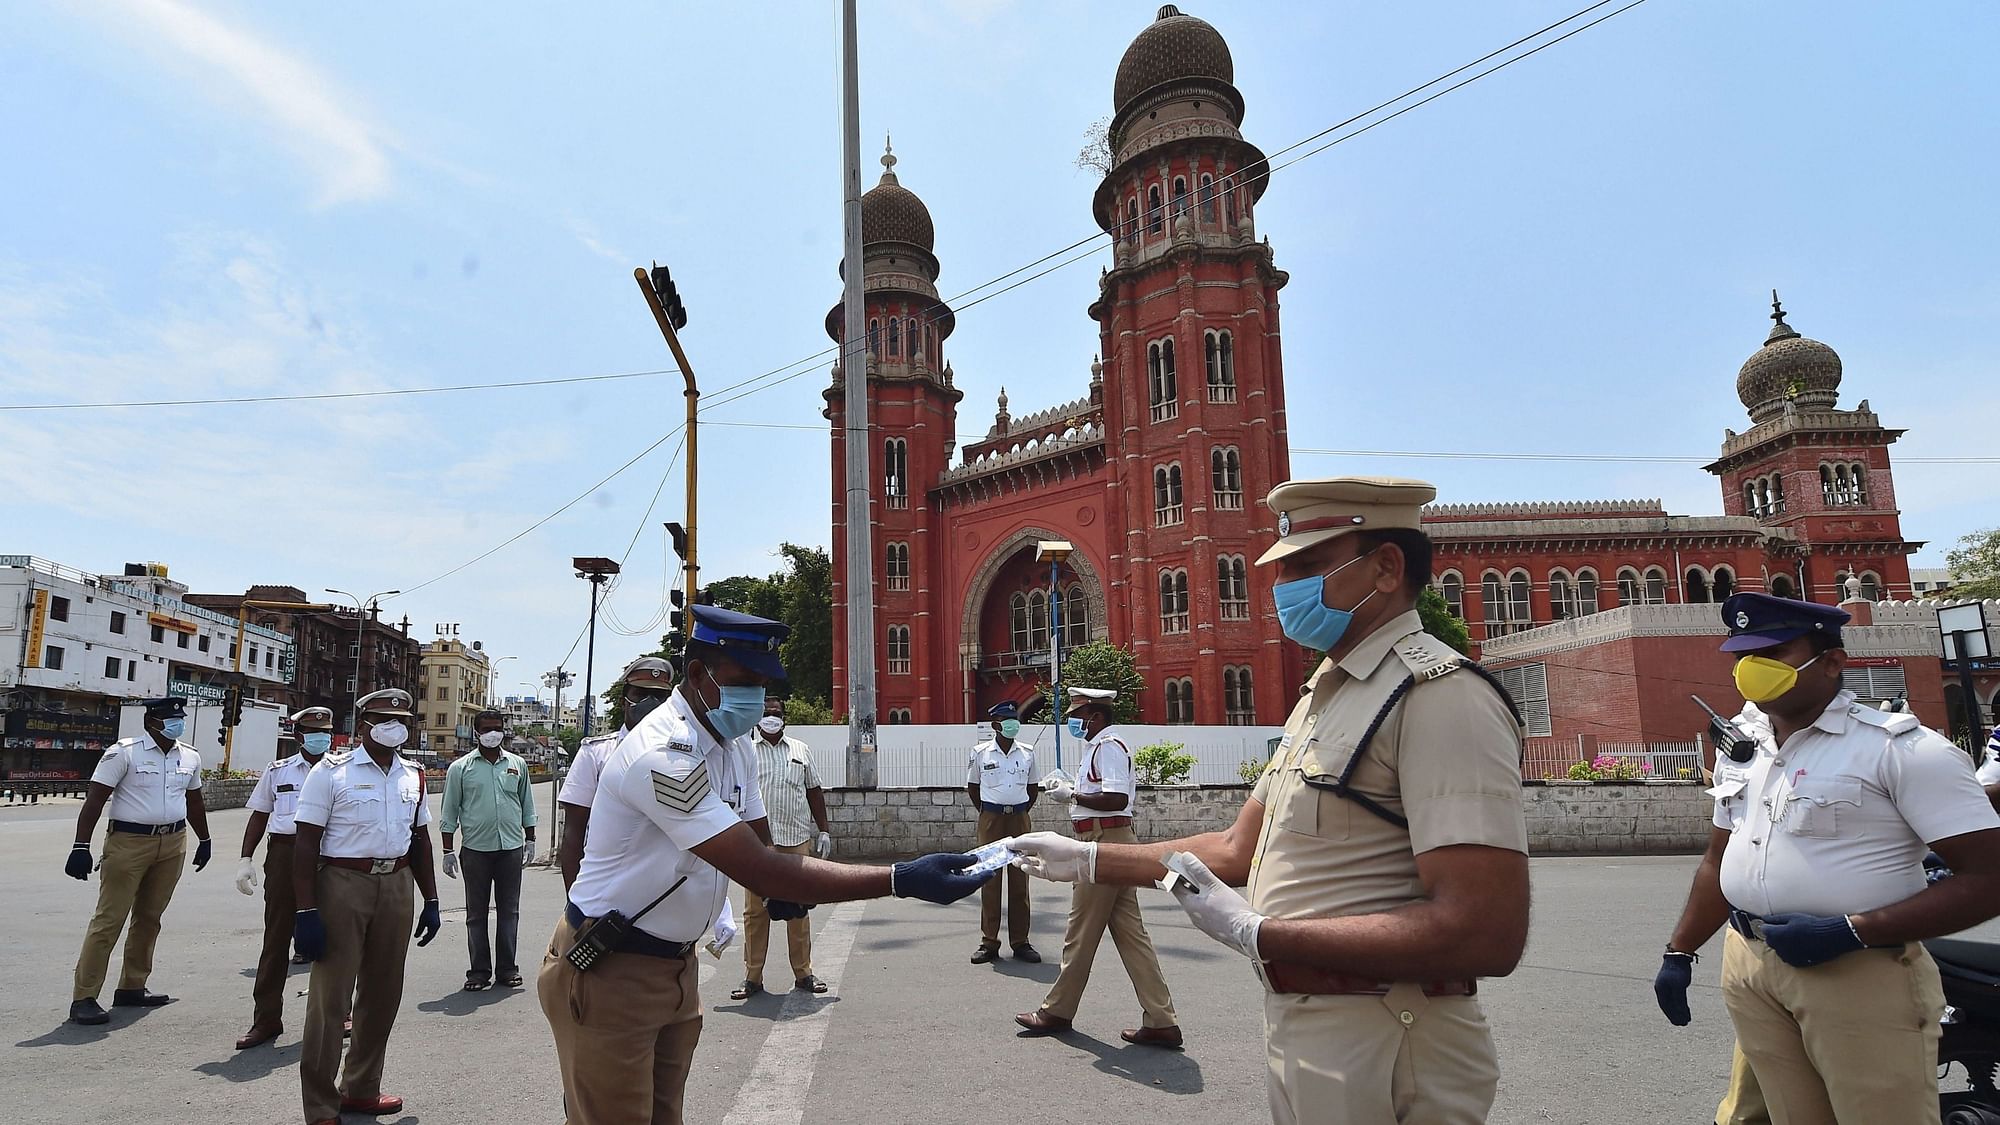 Chennai: Assistant Commissioner of Police (ACP), Traffic, Ravichandran distributes vitamin tablets to his colleagues in a bid to improve immunity against COVID-19 outbreak during the nationwide lockdown, in Chennai, Wednesday, April 29, 2020.